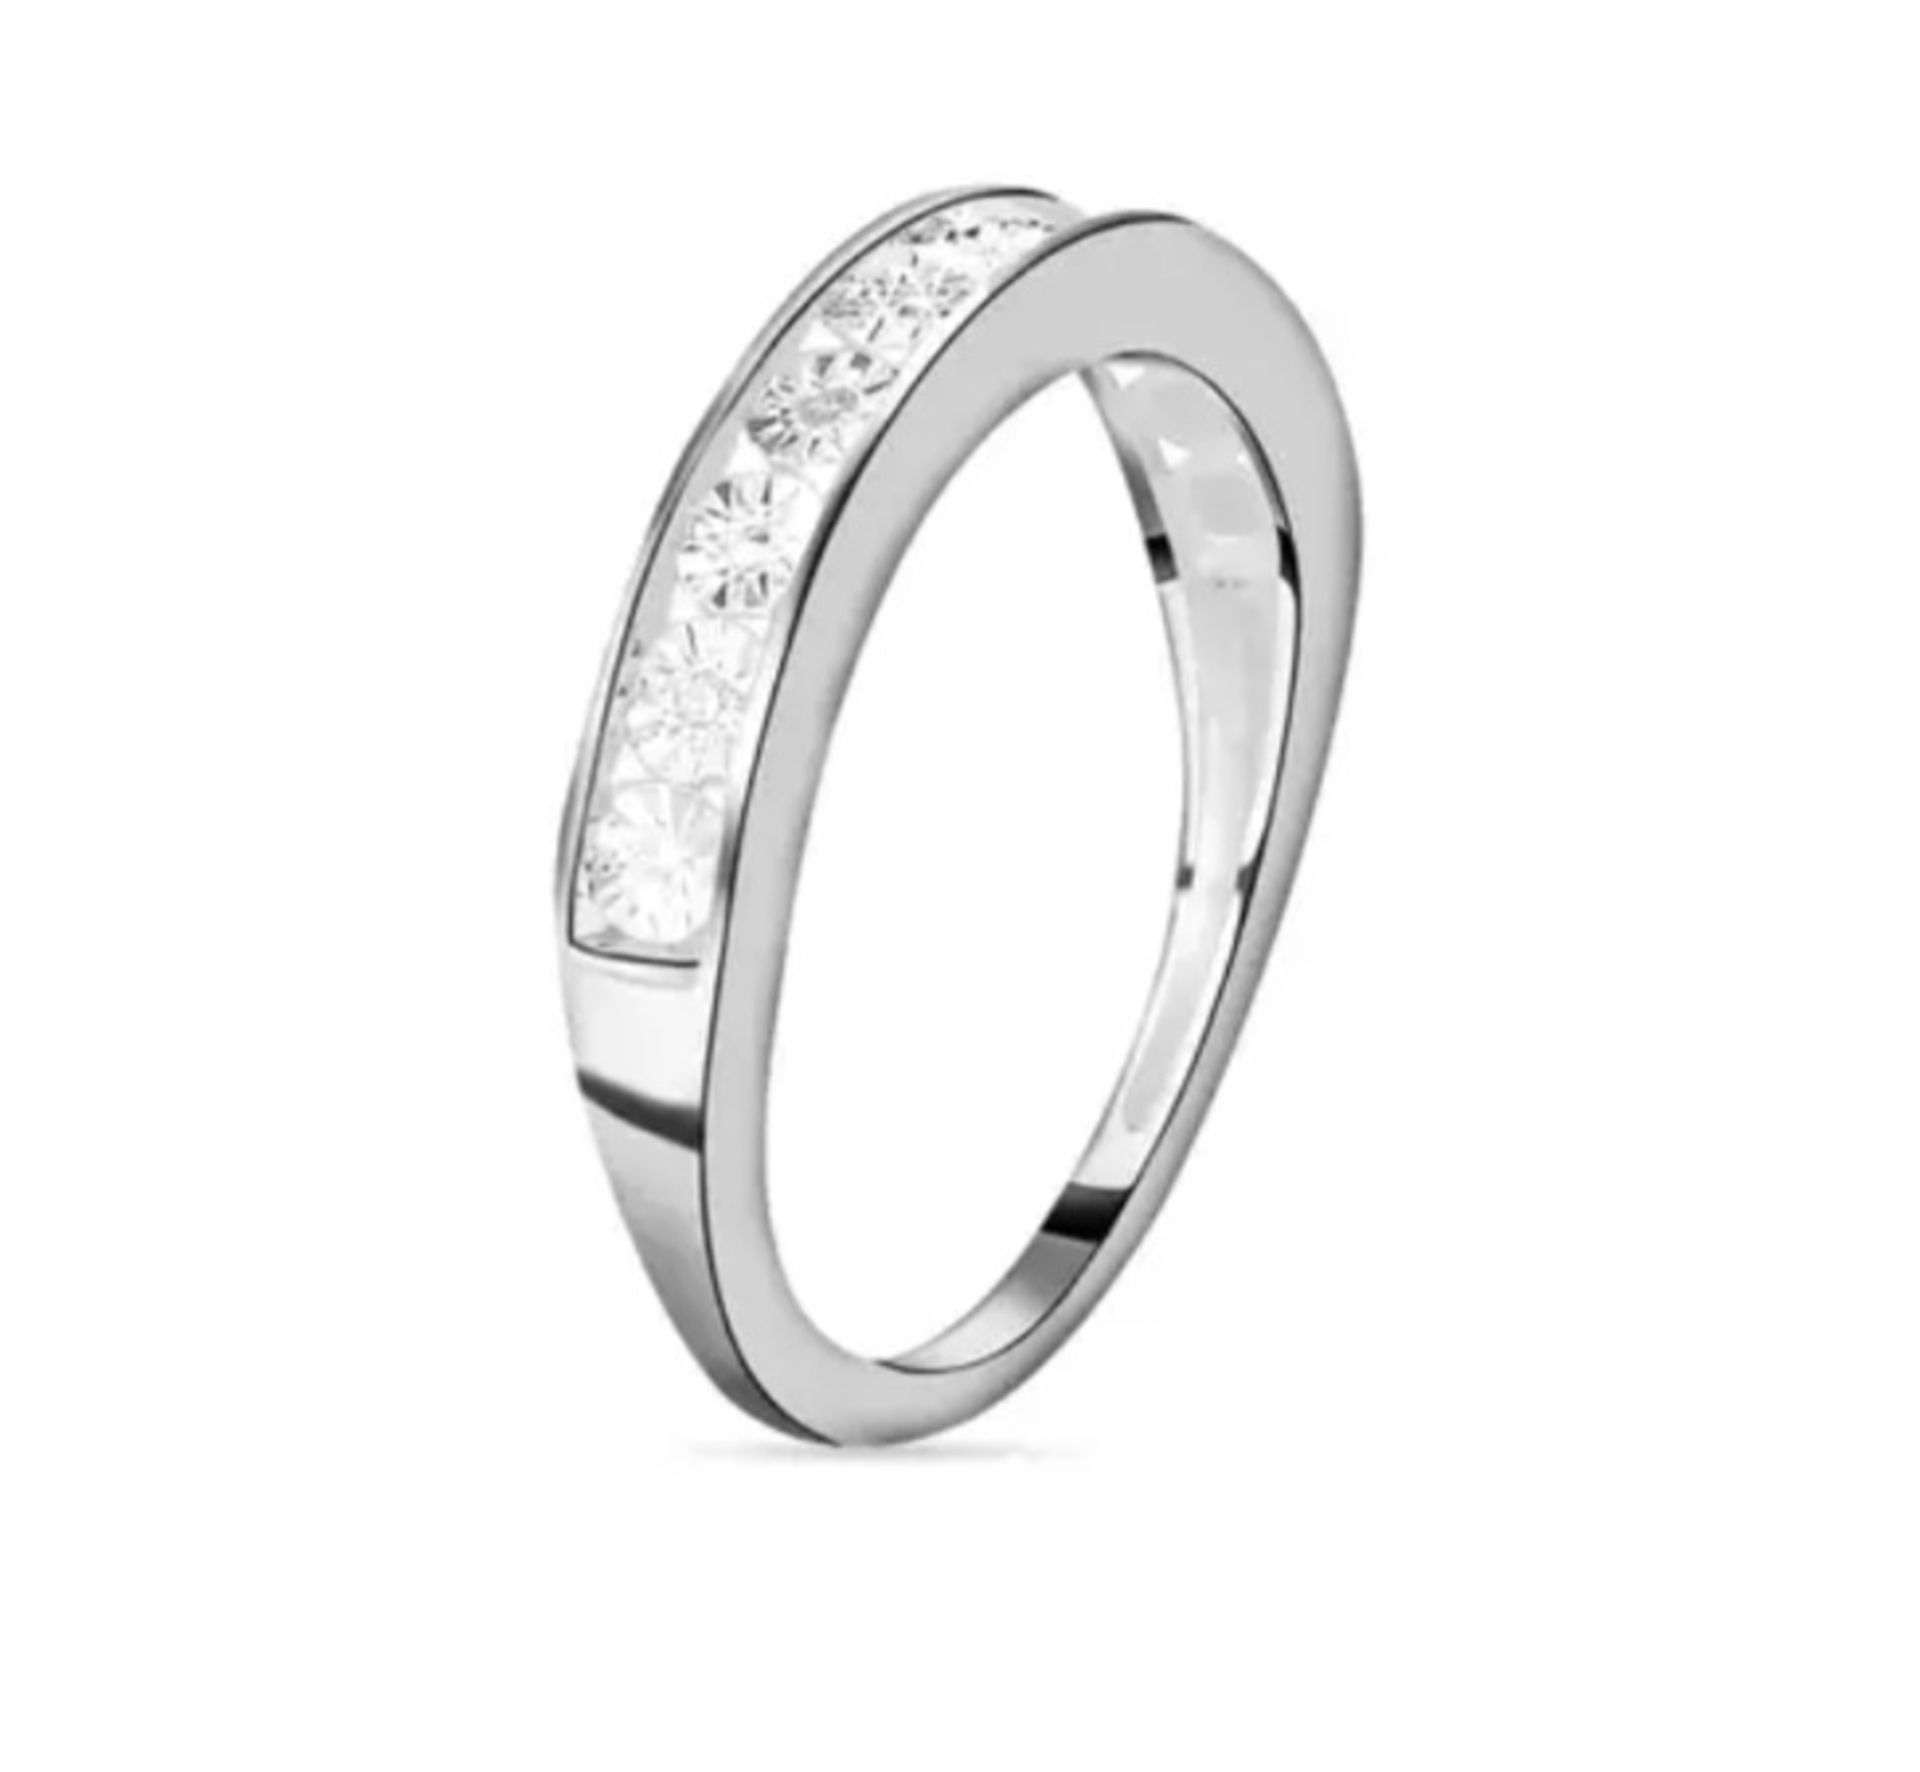 New! Diamond Half Eternity Ring in Sterling Silver - Image 3 of 4